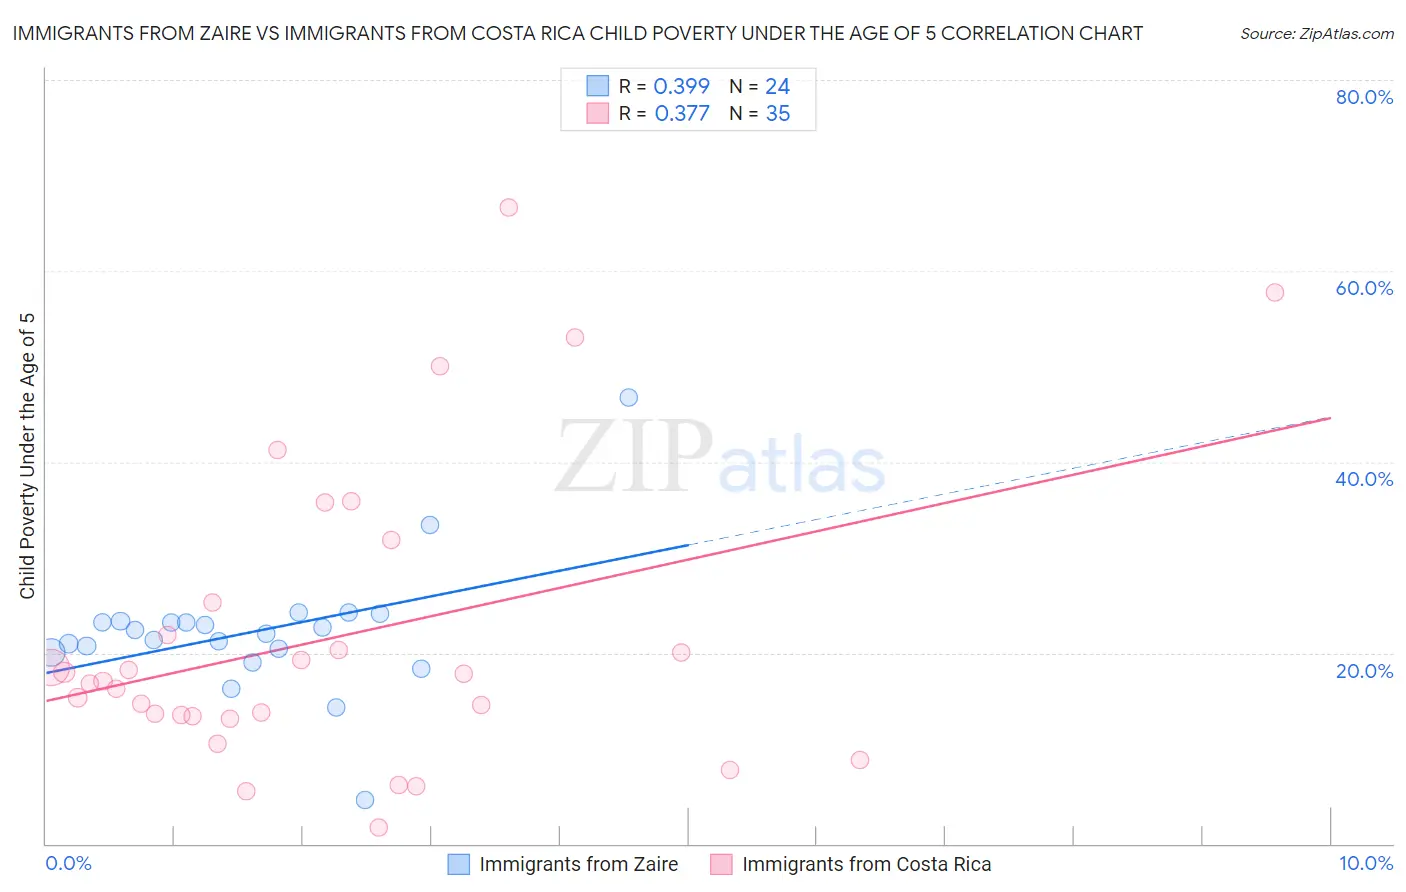 Immigrants from Zaire vs Immigrants from Costa Rica Child Poverty Under the Age of 5